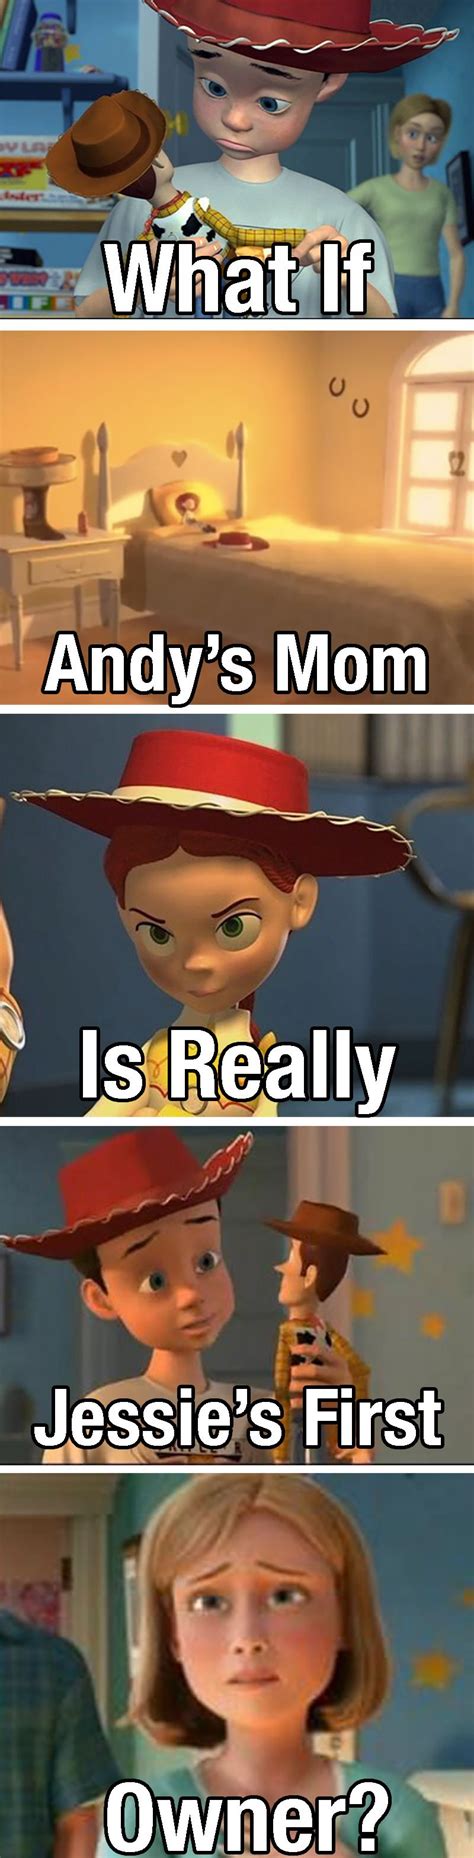 the real identity of andy s mom in toy story disney secrets disney theory disney funny